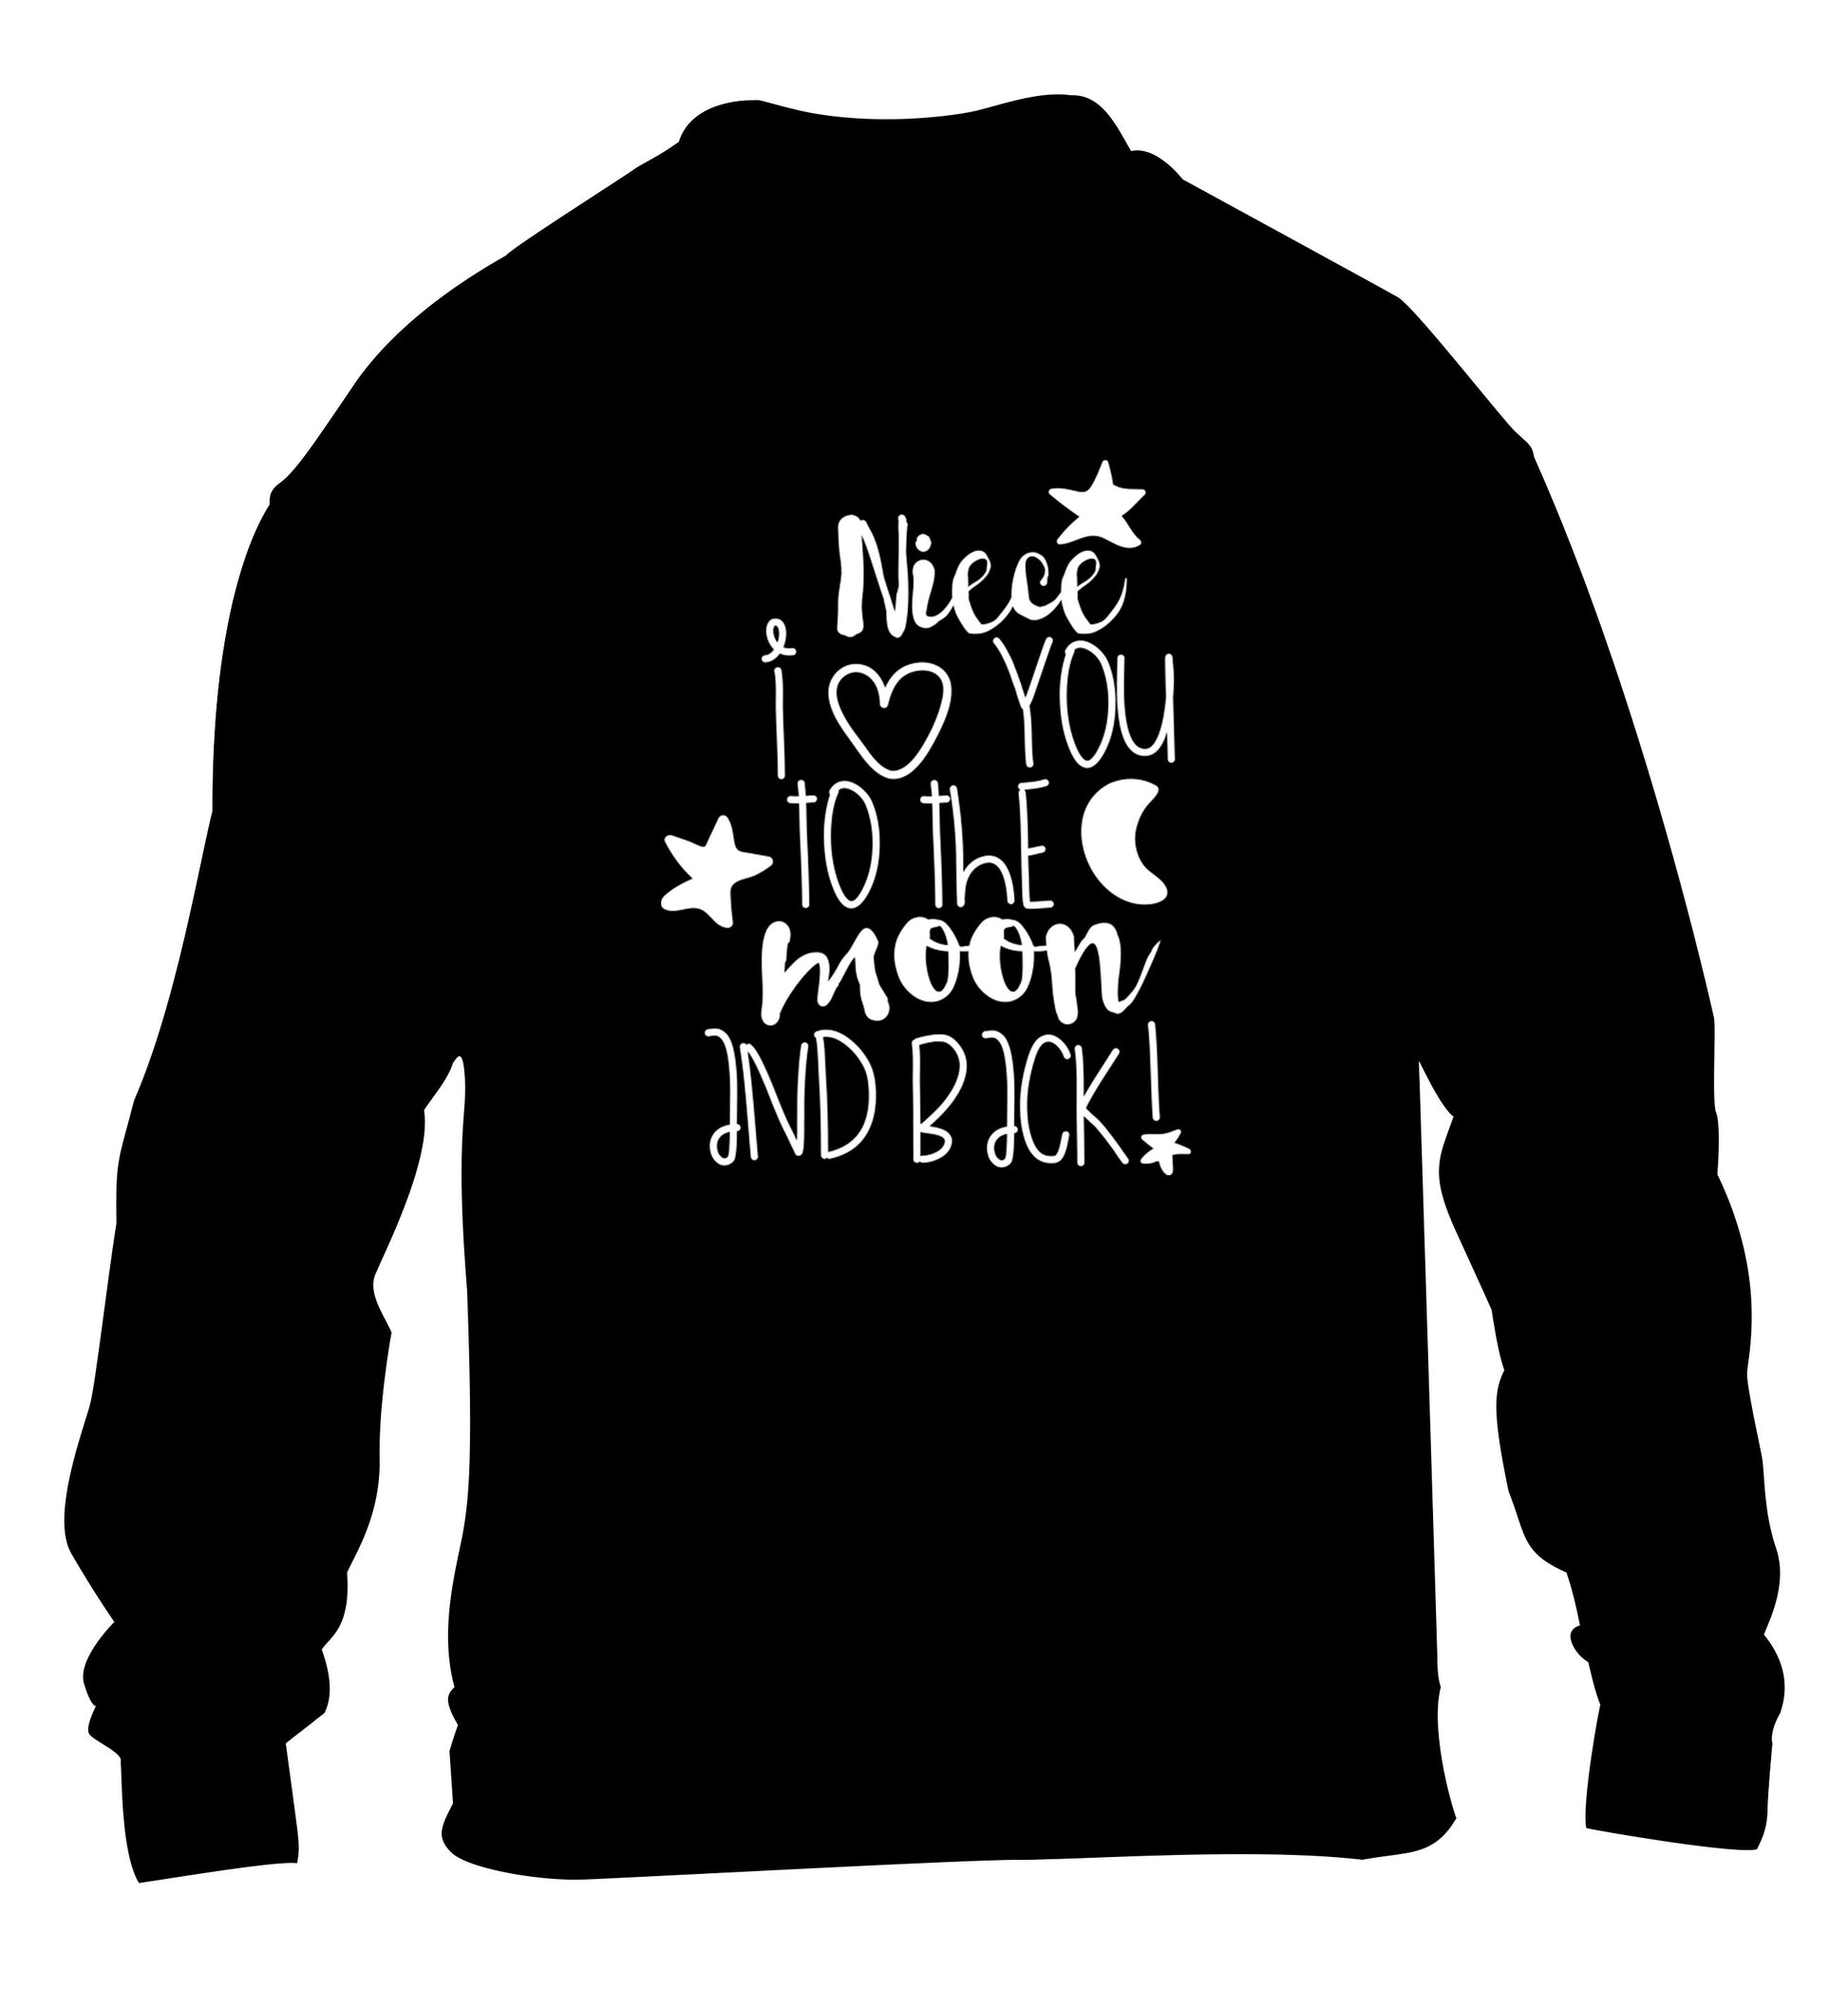 Niece I love you to the moon and back children's black  sweater 12-14 Years